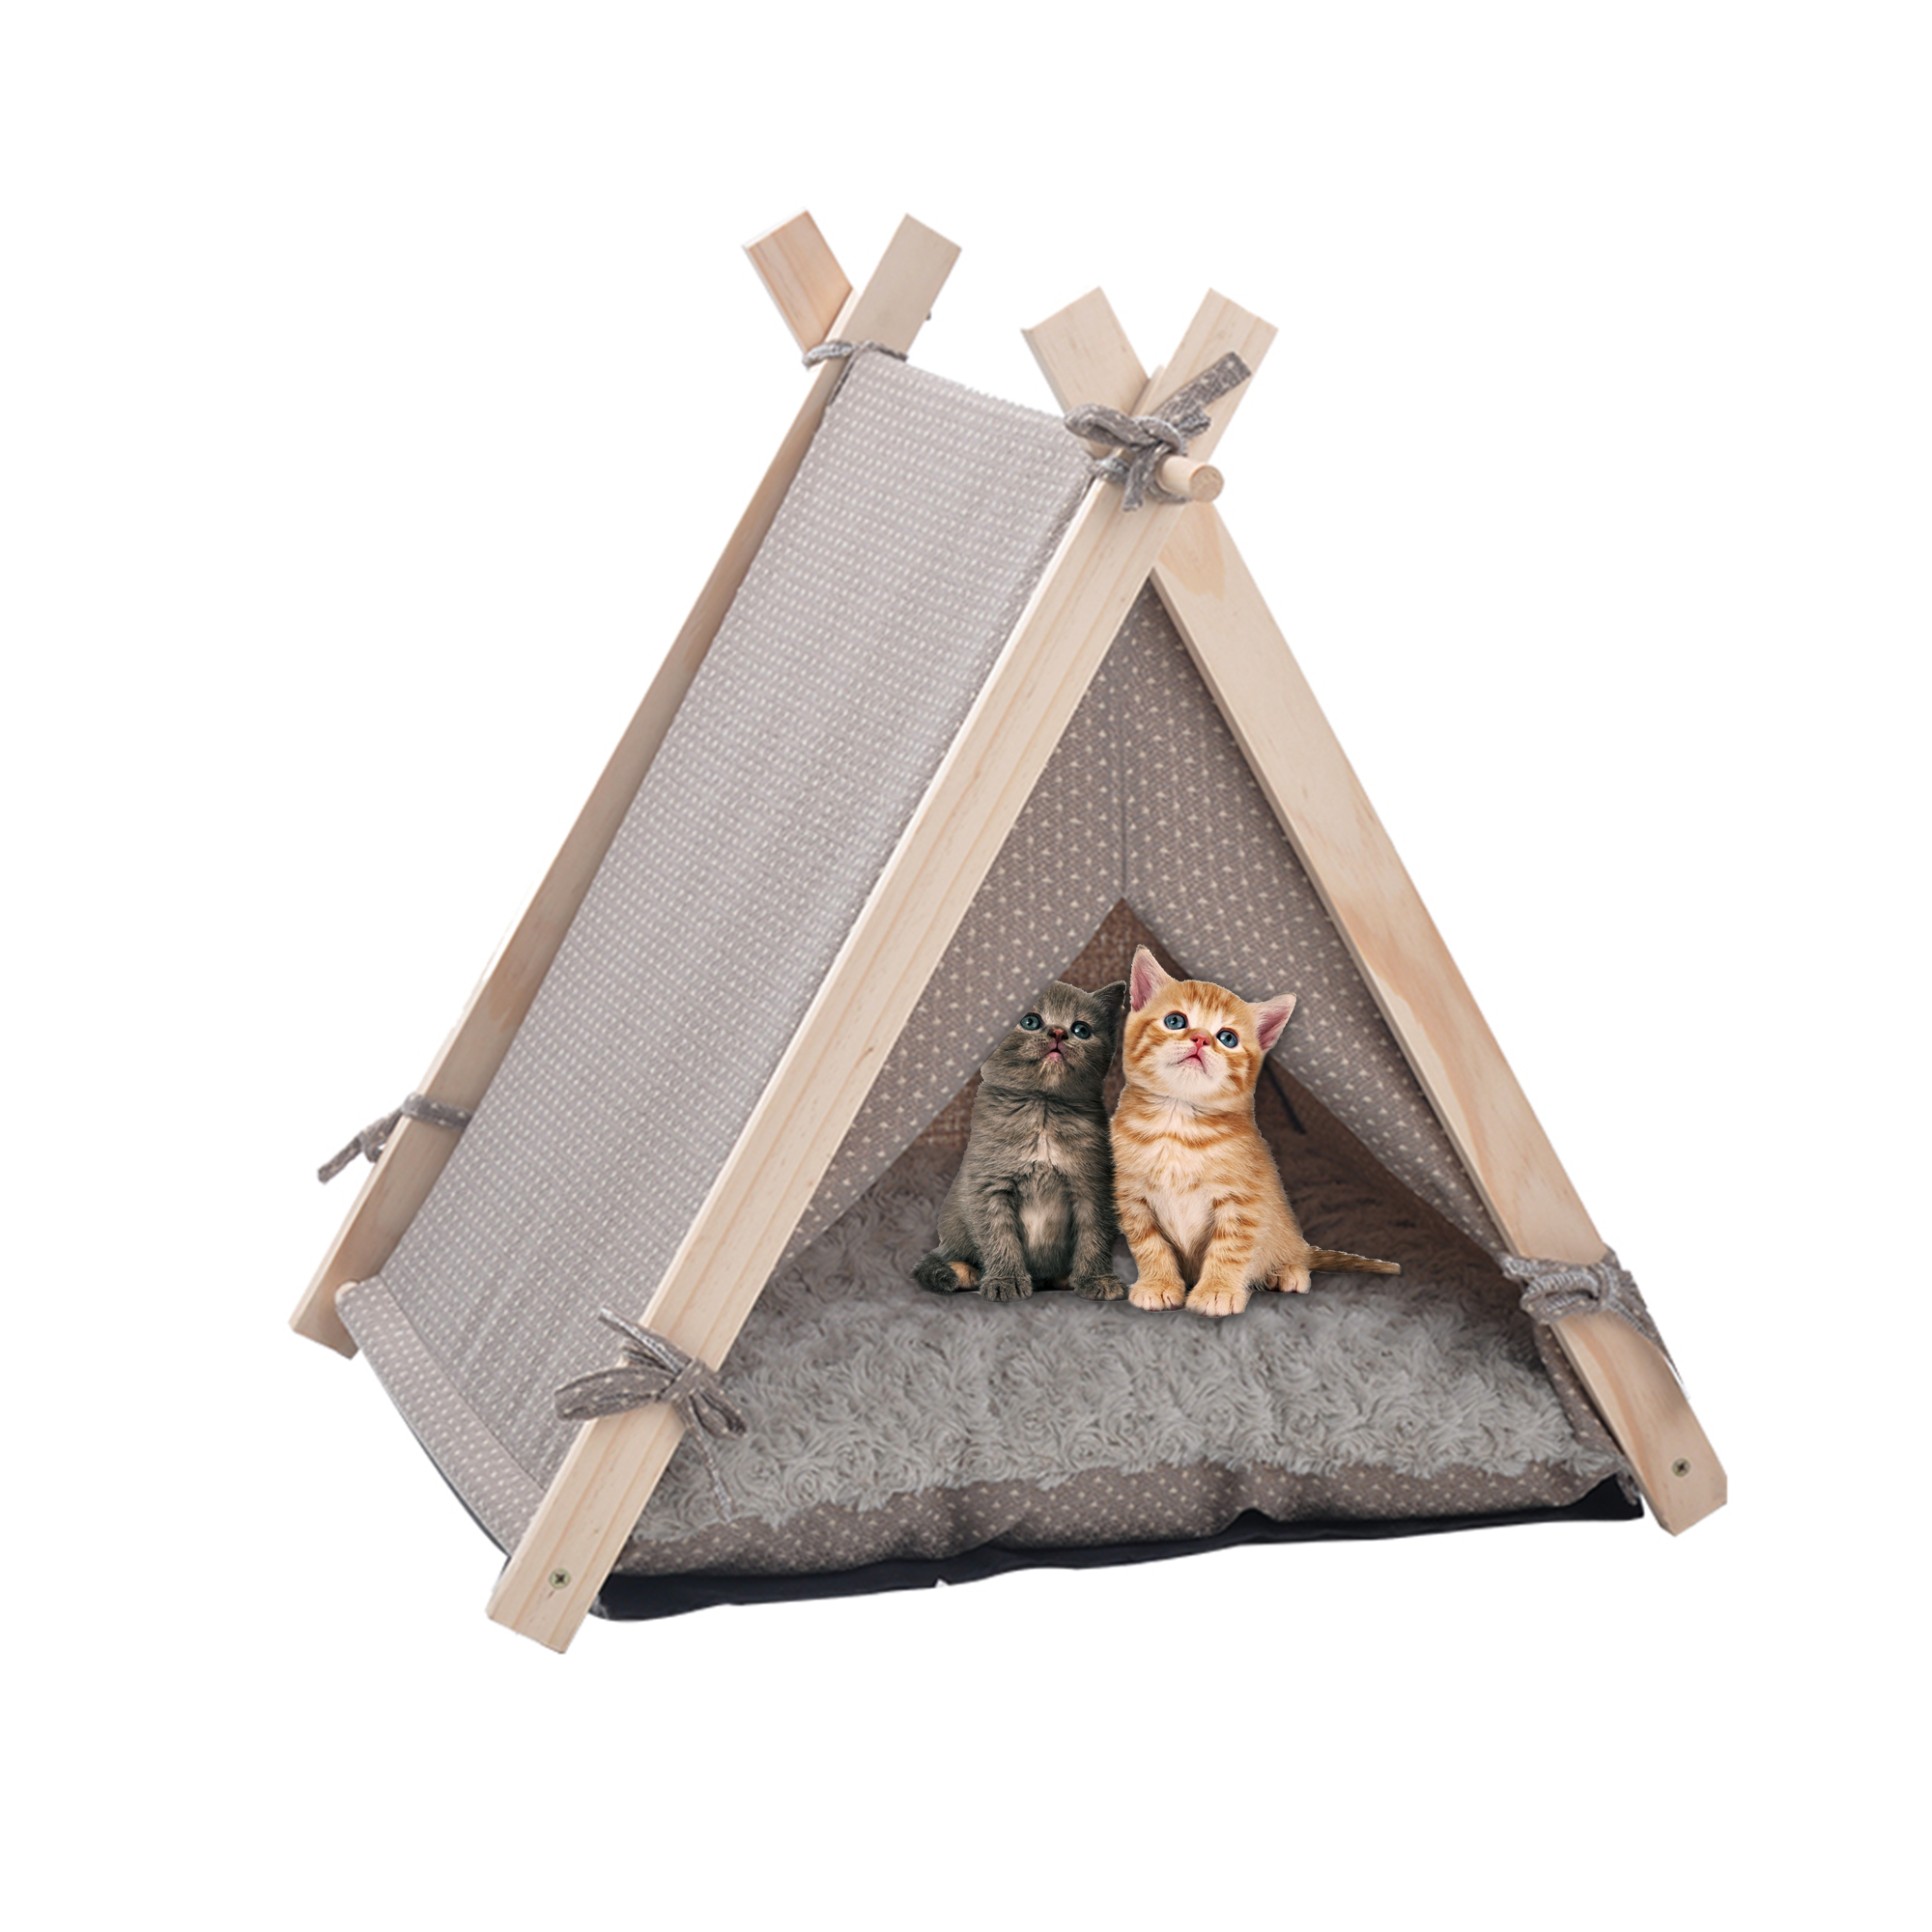 S, Black Star Quality Shop Teepee Dog Cat Bed with Cushion Dog Tent Cat Tent Portable Canvas Tent Pet Cat Supplies Puppy Little House Quickly Assembled Disassembled